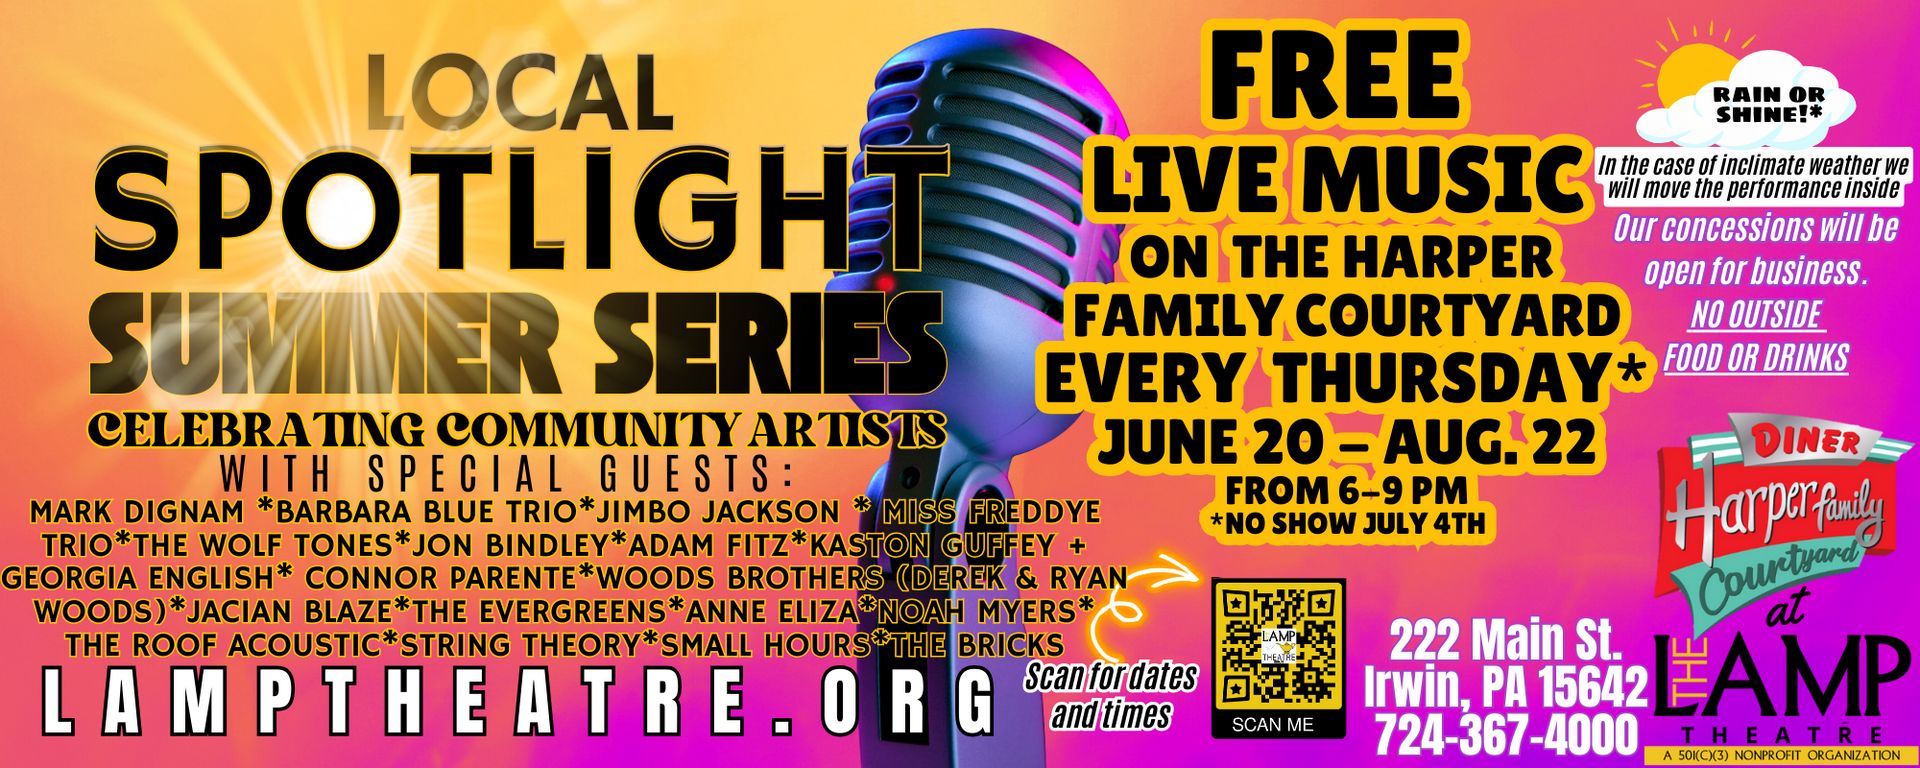 Local Spotlight Summer Series FREE Live Music on the Harper Family Courtyard! Every Thurs. June-Aug, Irwin, Pennsylvania, United States